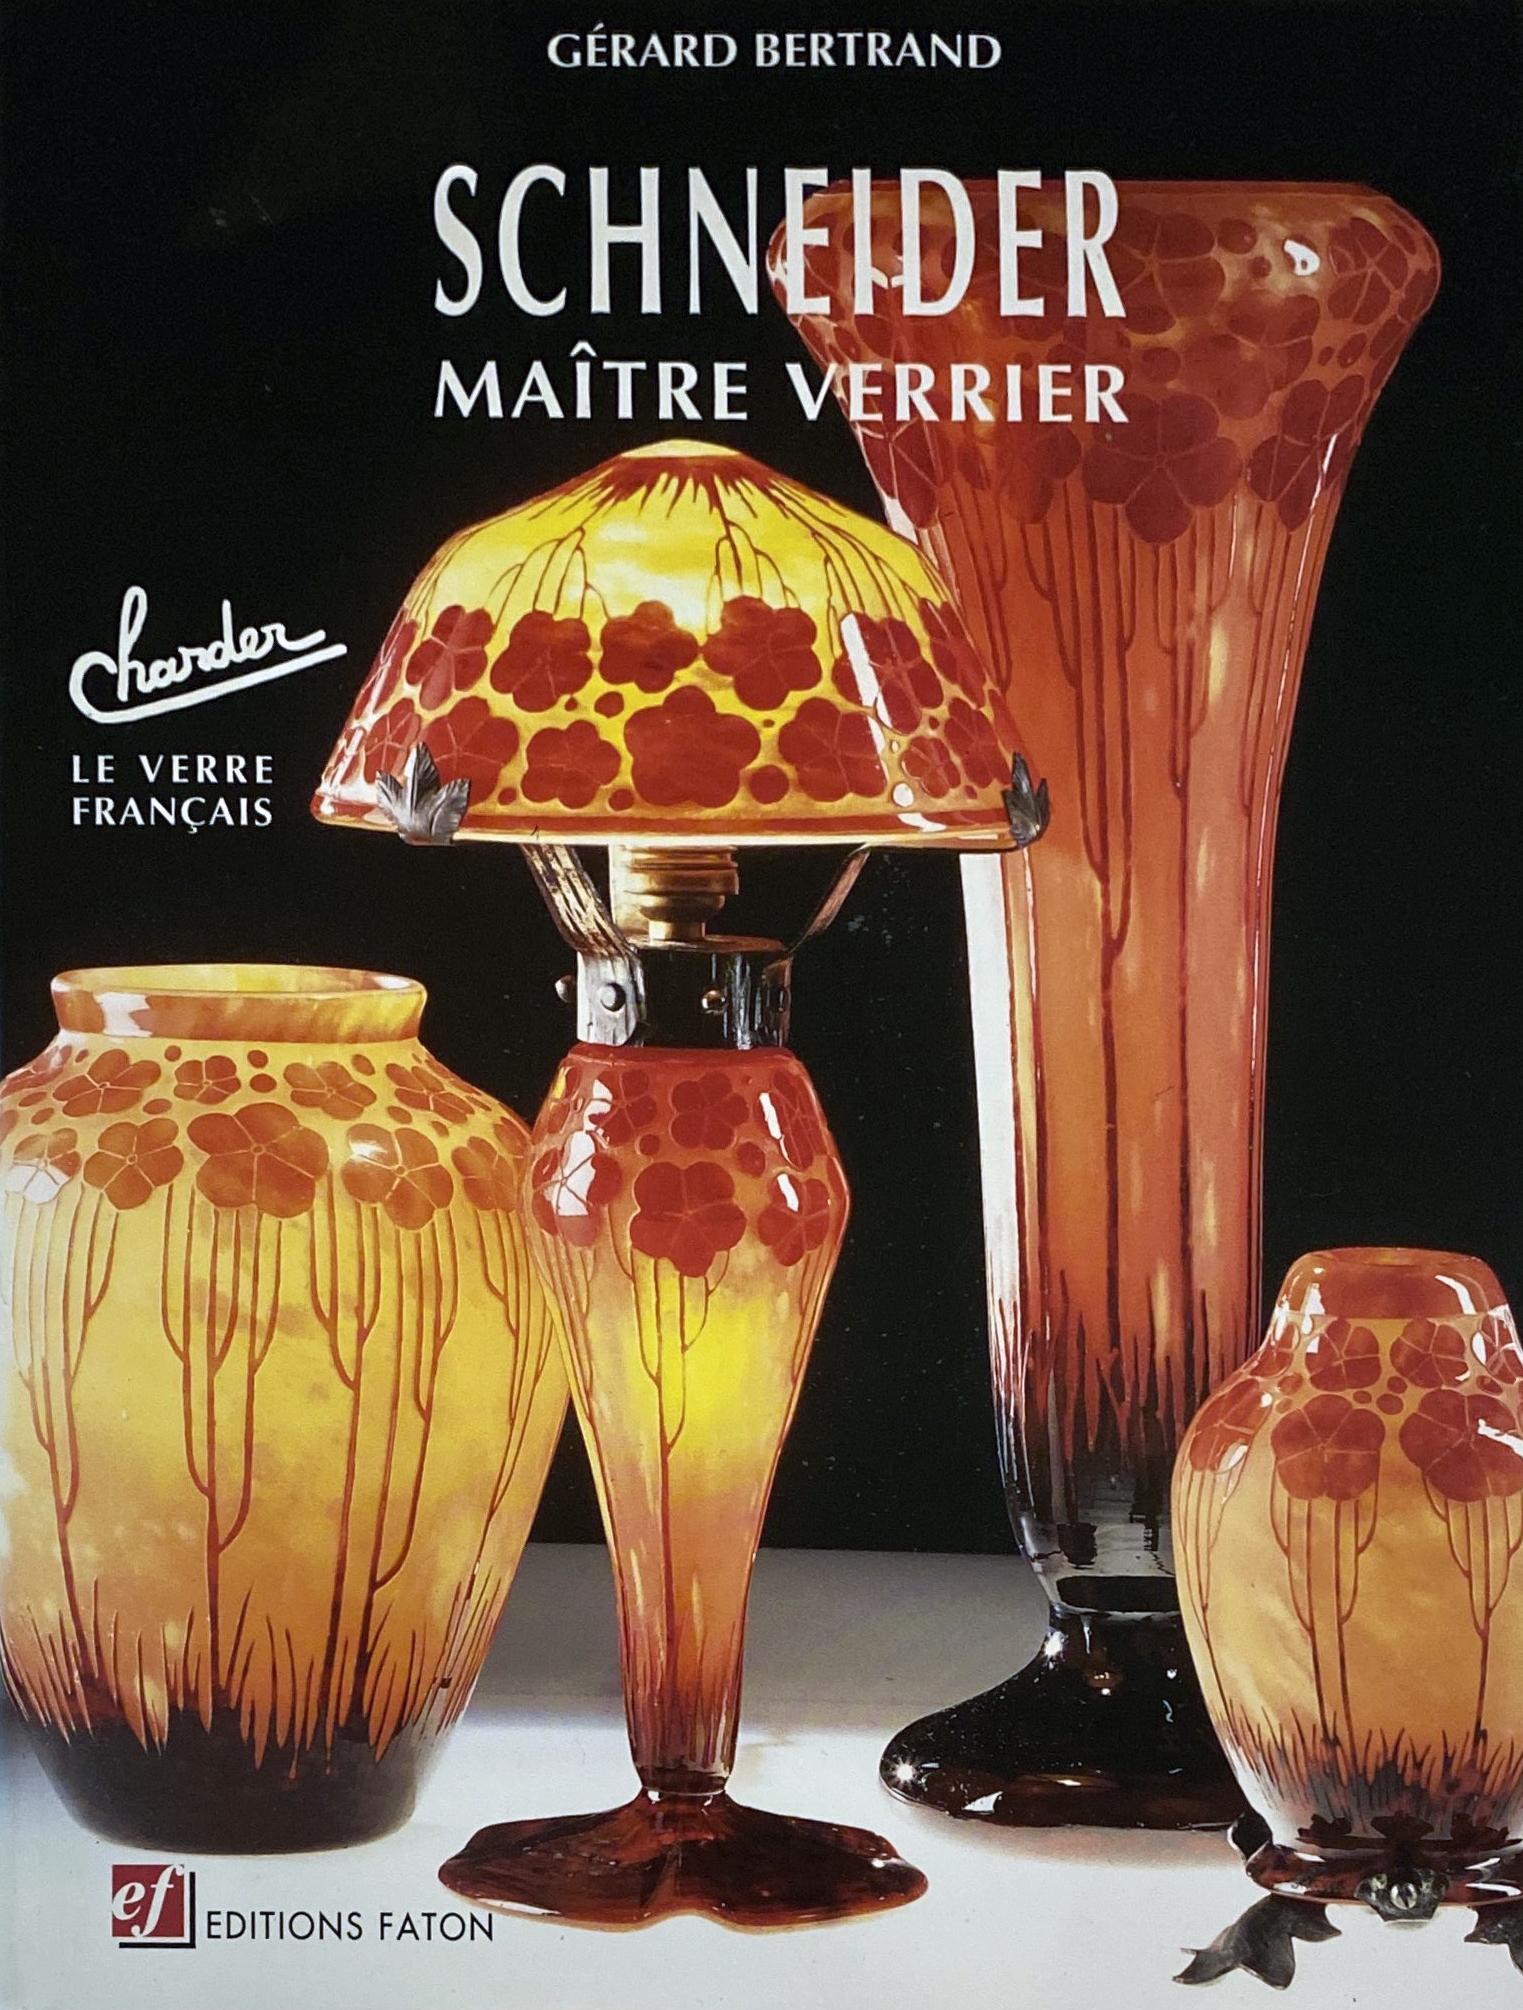 20th Century Art Deco Glass Vase by Le Verre Francais and Charles Schneider